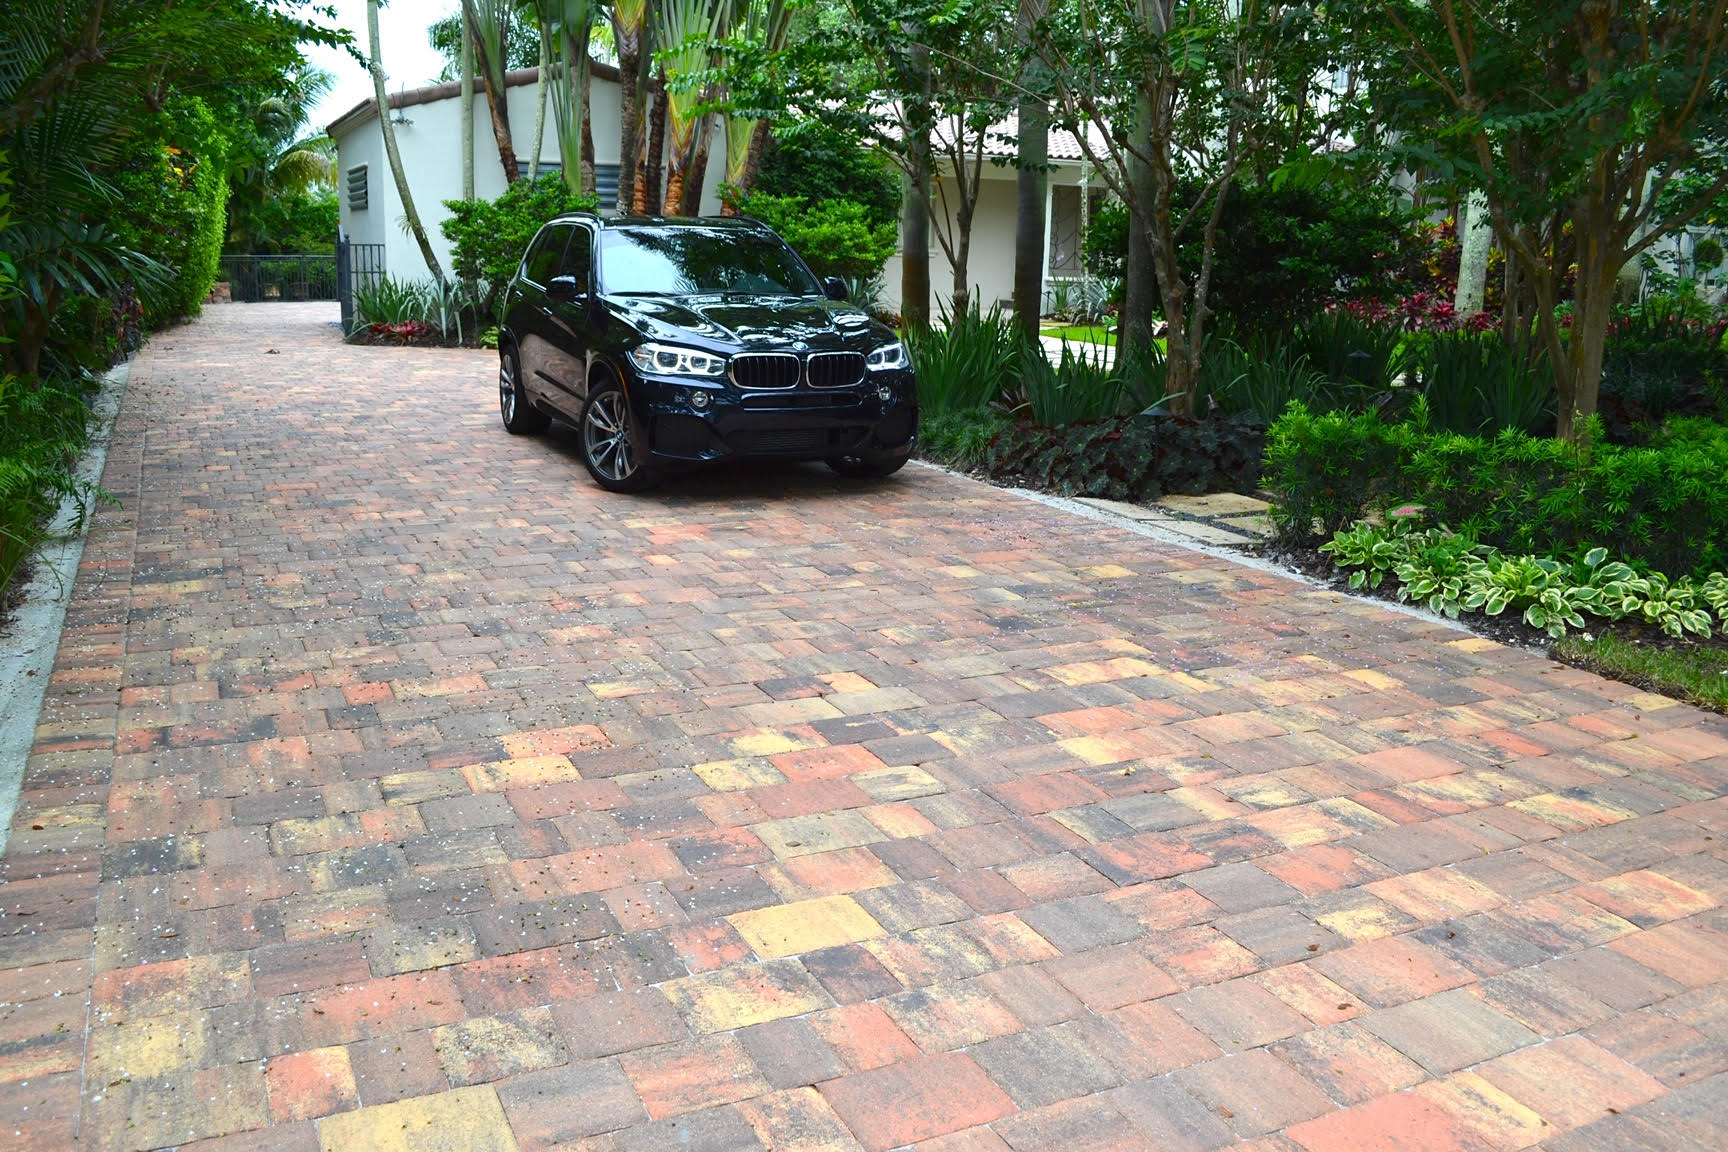 Pool Paver Installation in Chicago, Illinois